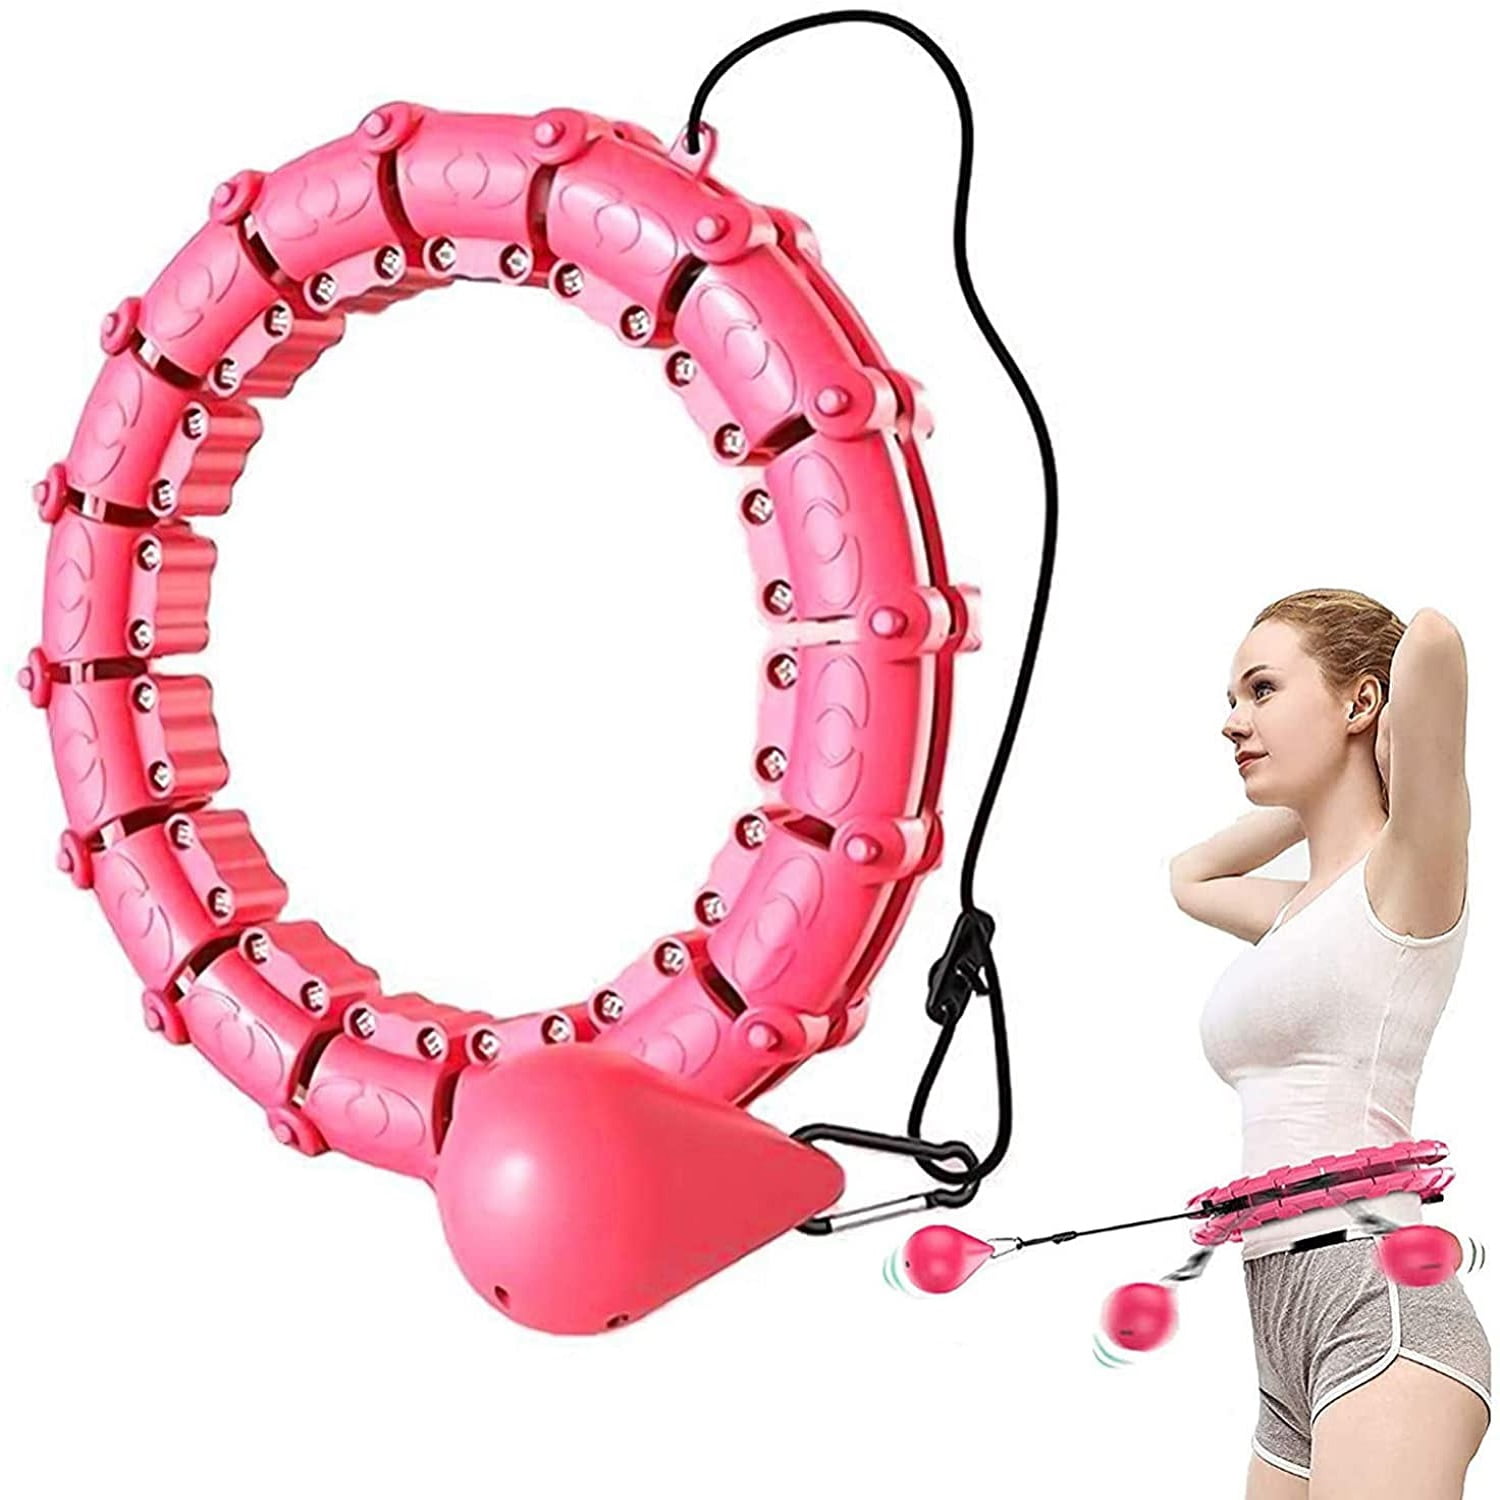 Adjustable Waist Slimming Fitness Waist Training Detachable and Size Adjustable Design Fat Burning Healthy Model Sports Life Intelligent Counting Auto-Spinning Hoop Exercise Weighted Hula Hoop 